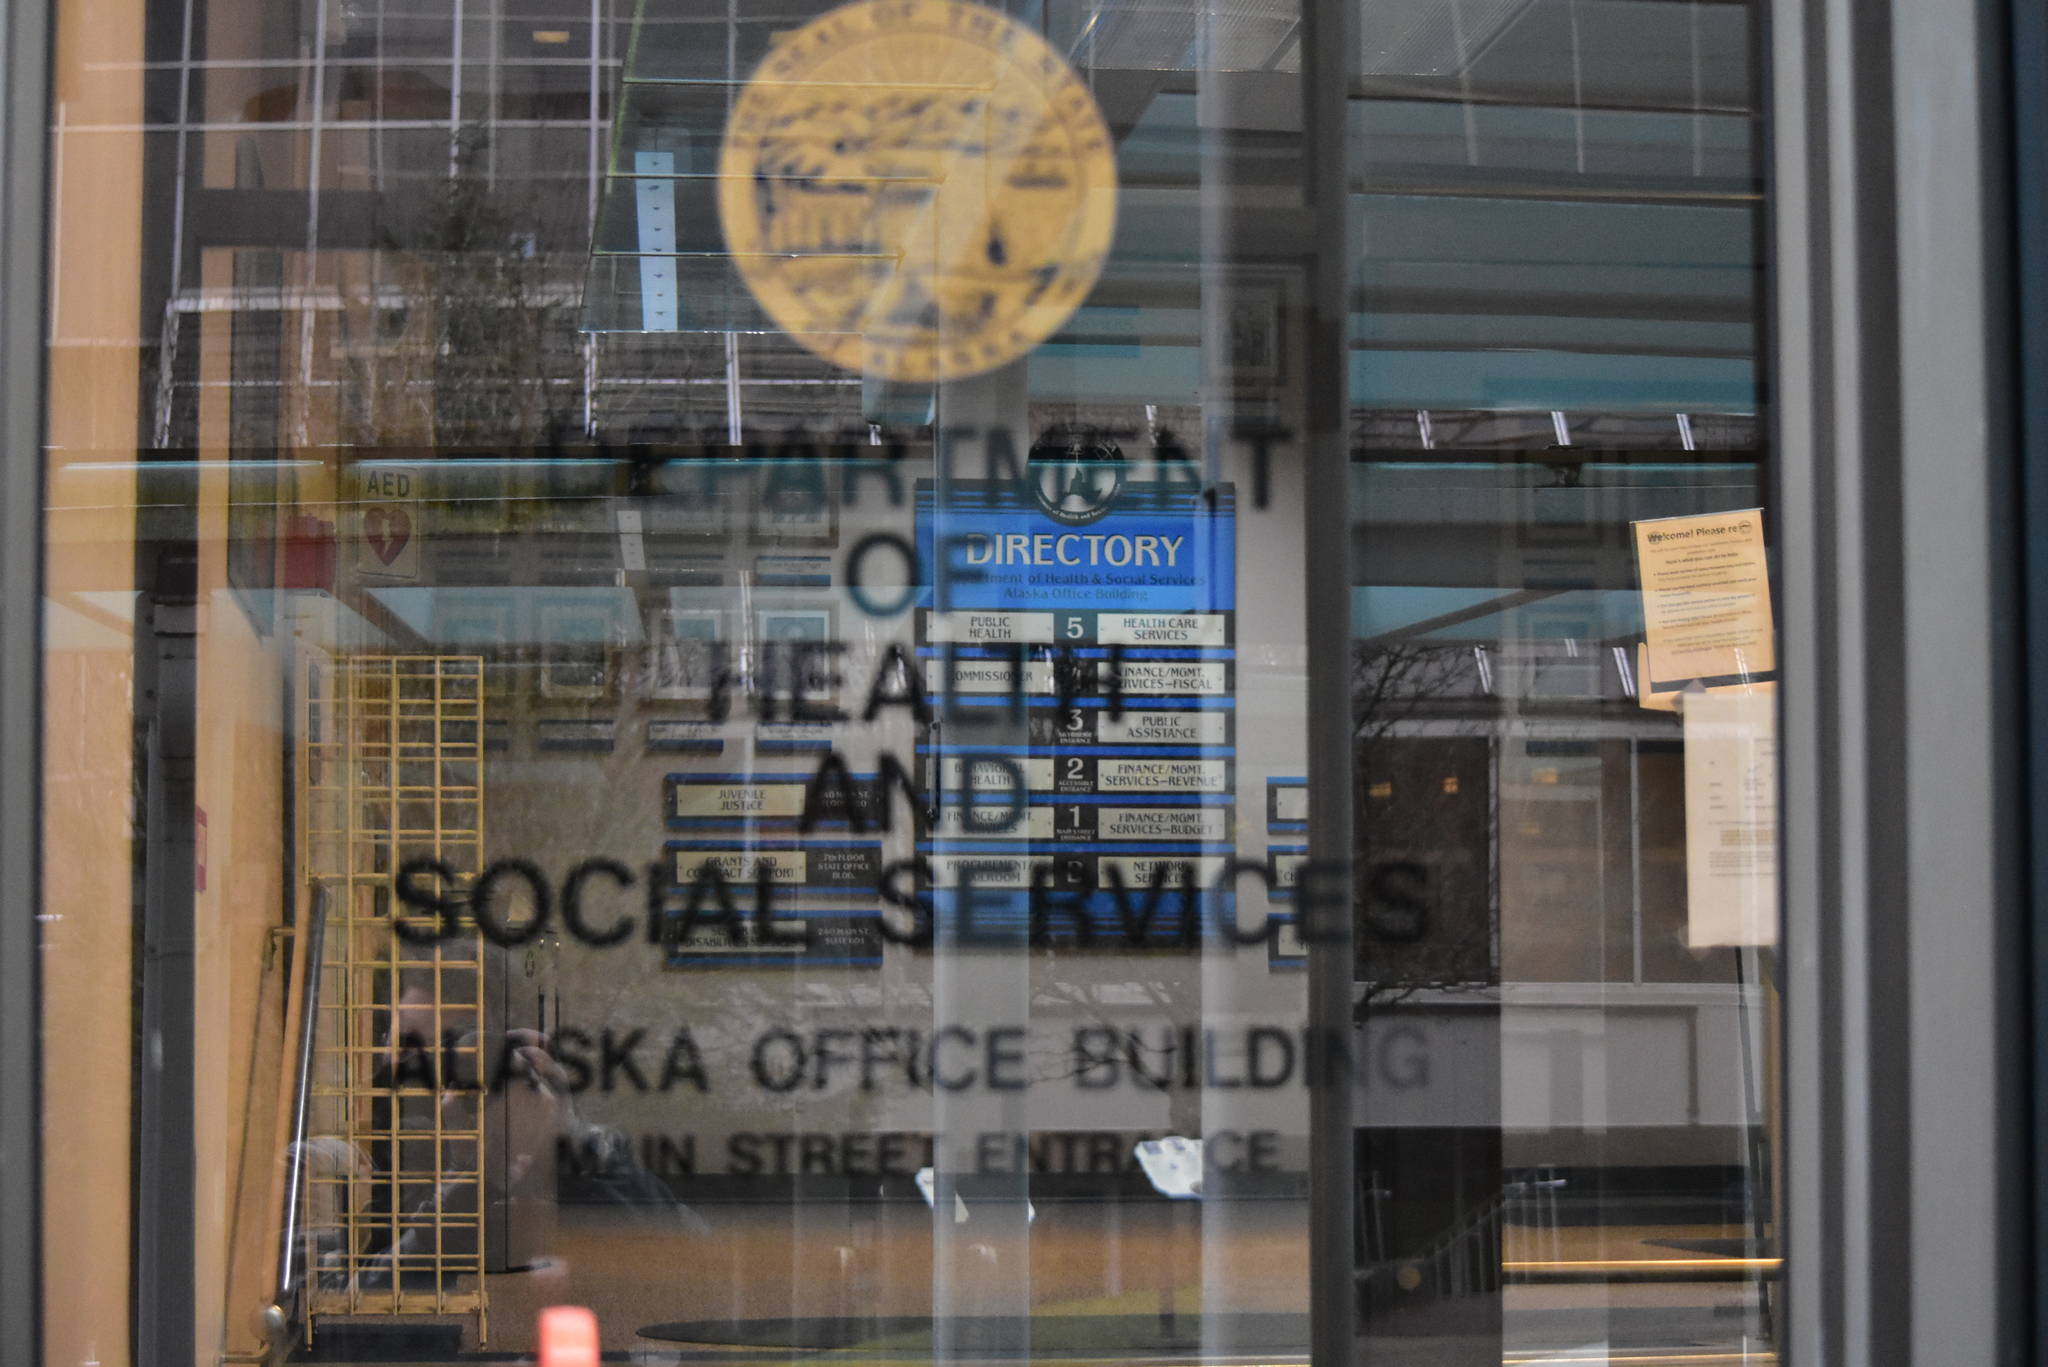 The entrance to the Alaska Department of Health and Social Services building in downtown Juneau on Wednesday, Jan. 13, 2021. Gov. Mike Dunleavy has proposed splitting the department in two to try and spread out the administrative burden, but health care workers and tribal leaders say they weren't consulted on changes and Alaska Natives will likely be negatively impacted. (Peter Segall / Juneau Empire)